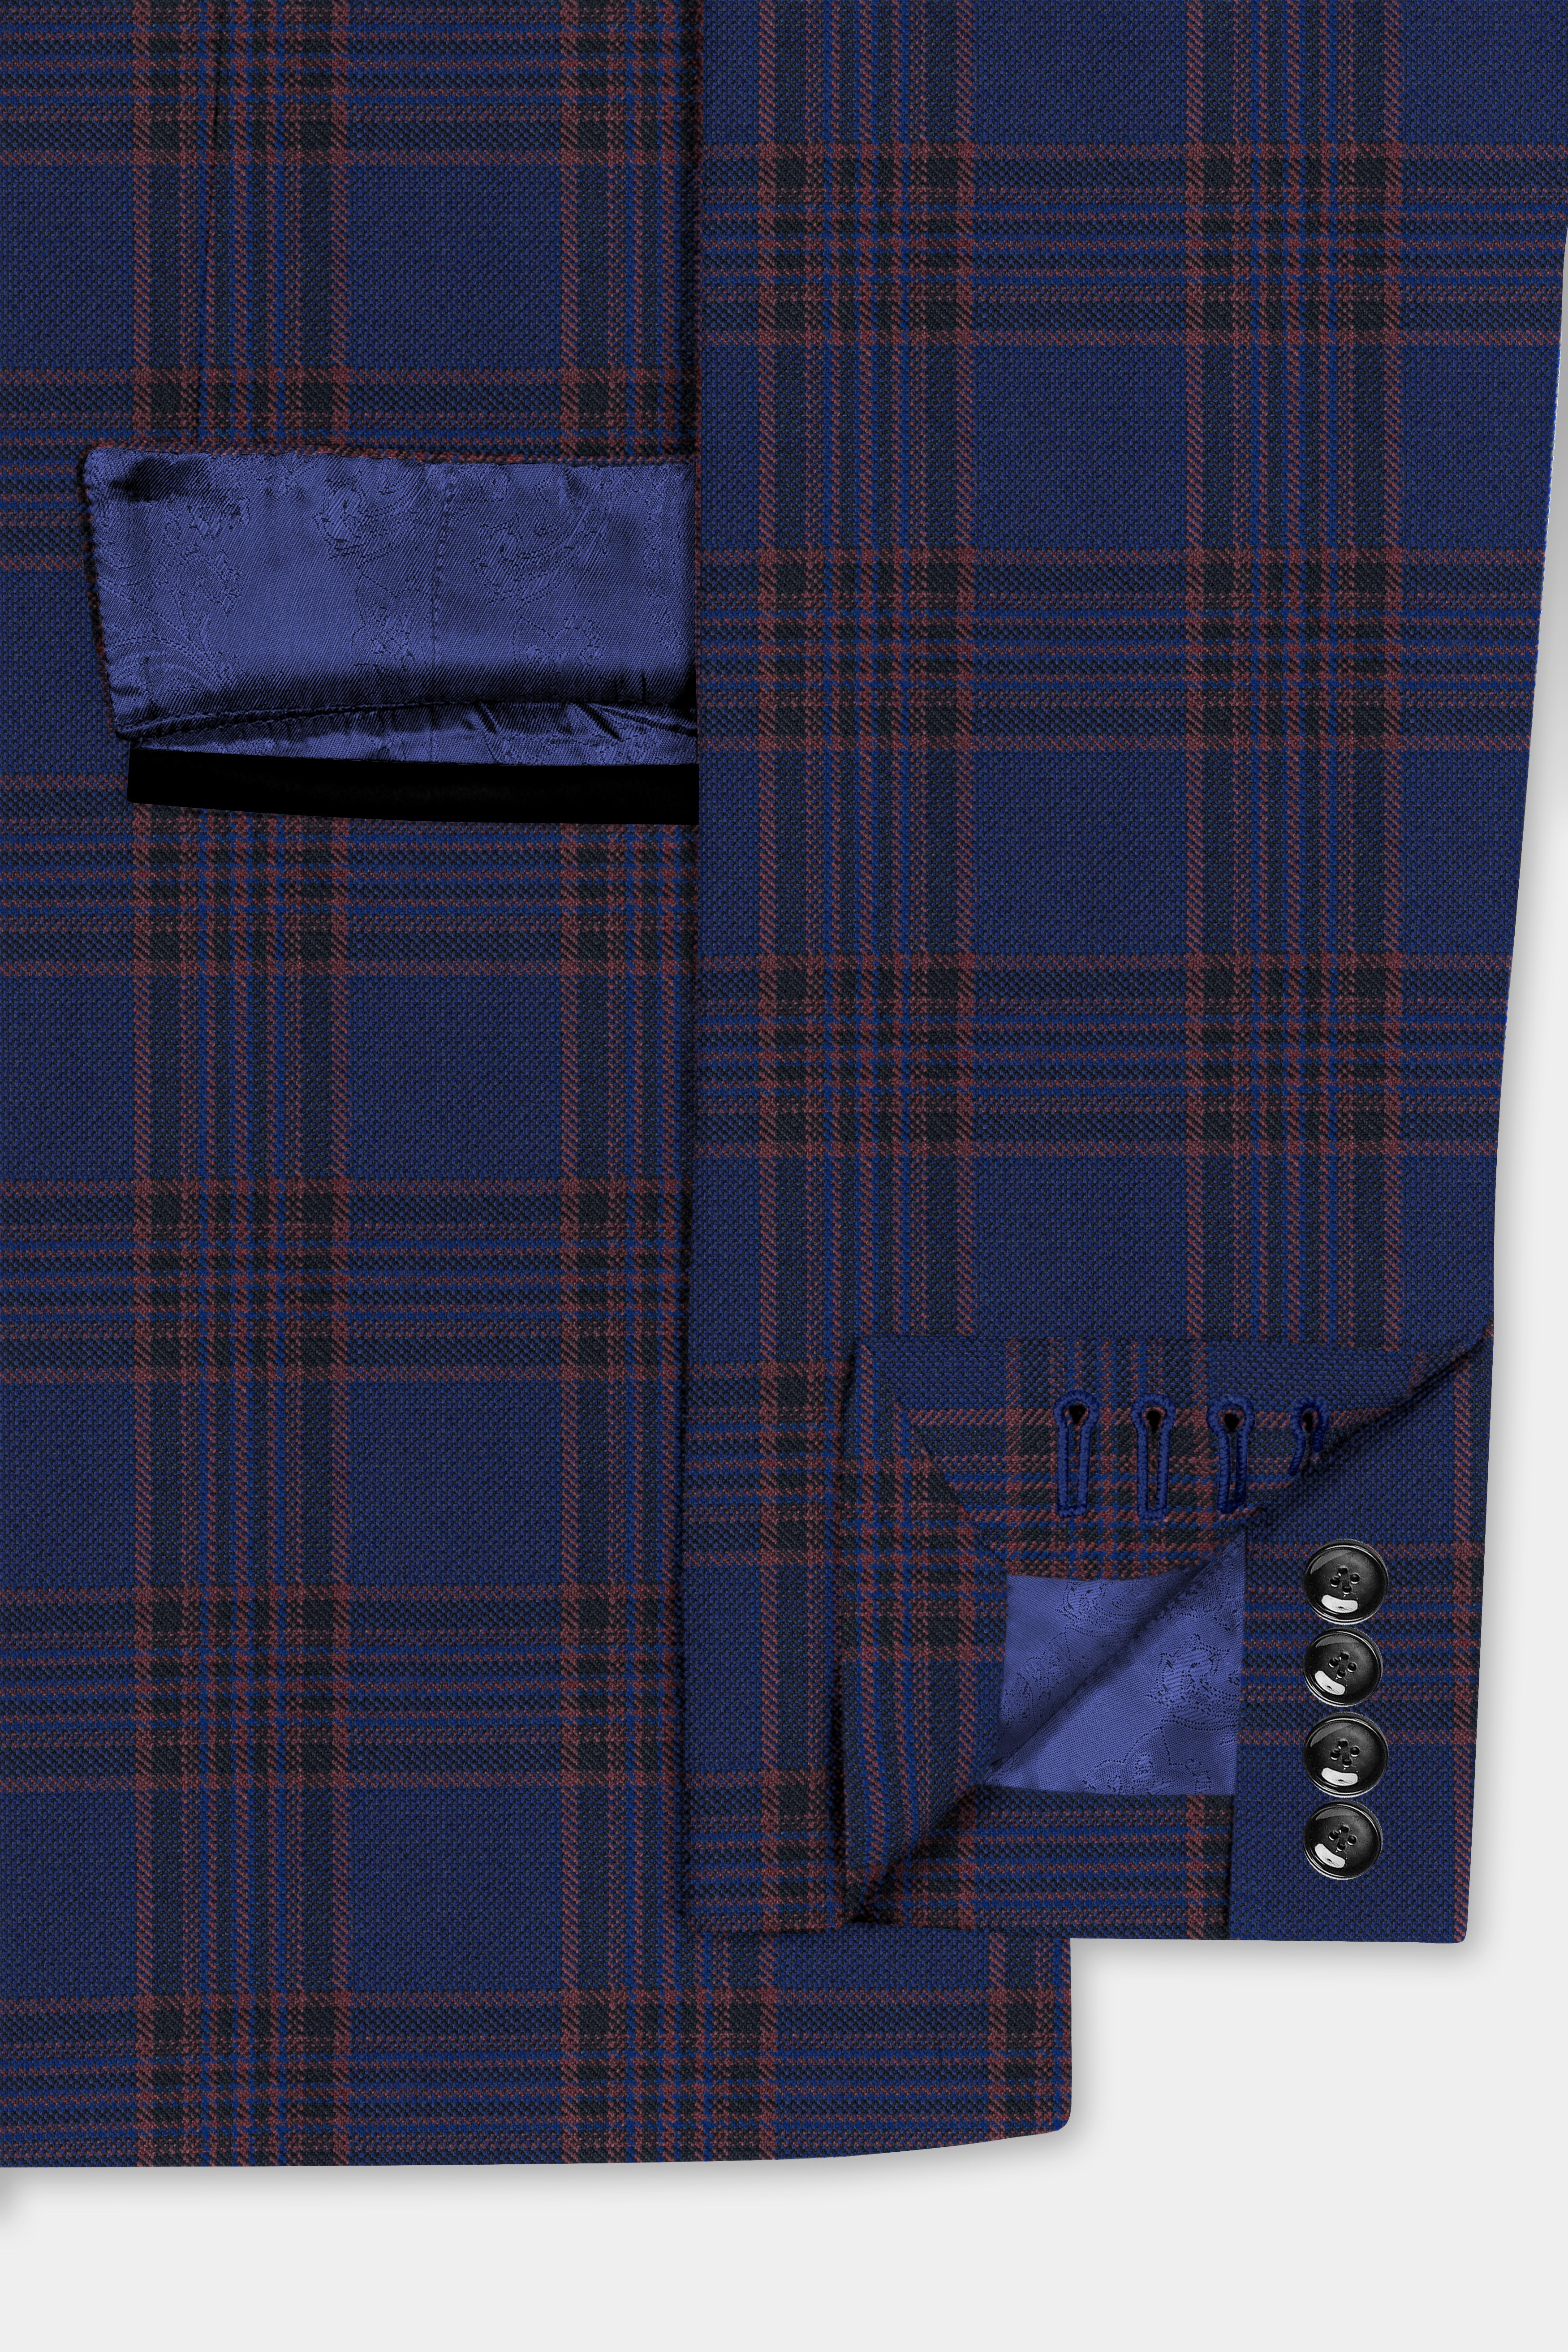 Bunting Blue with Livid Brown Plaid Wool Blend Tuxedo Suit